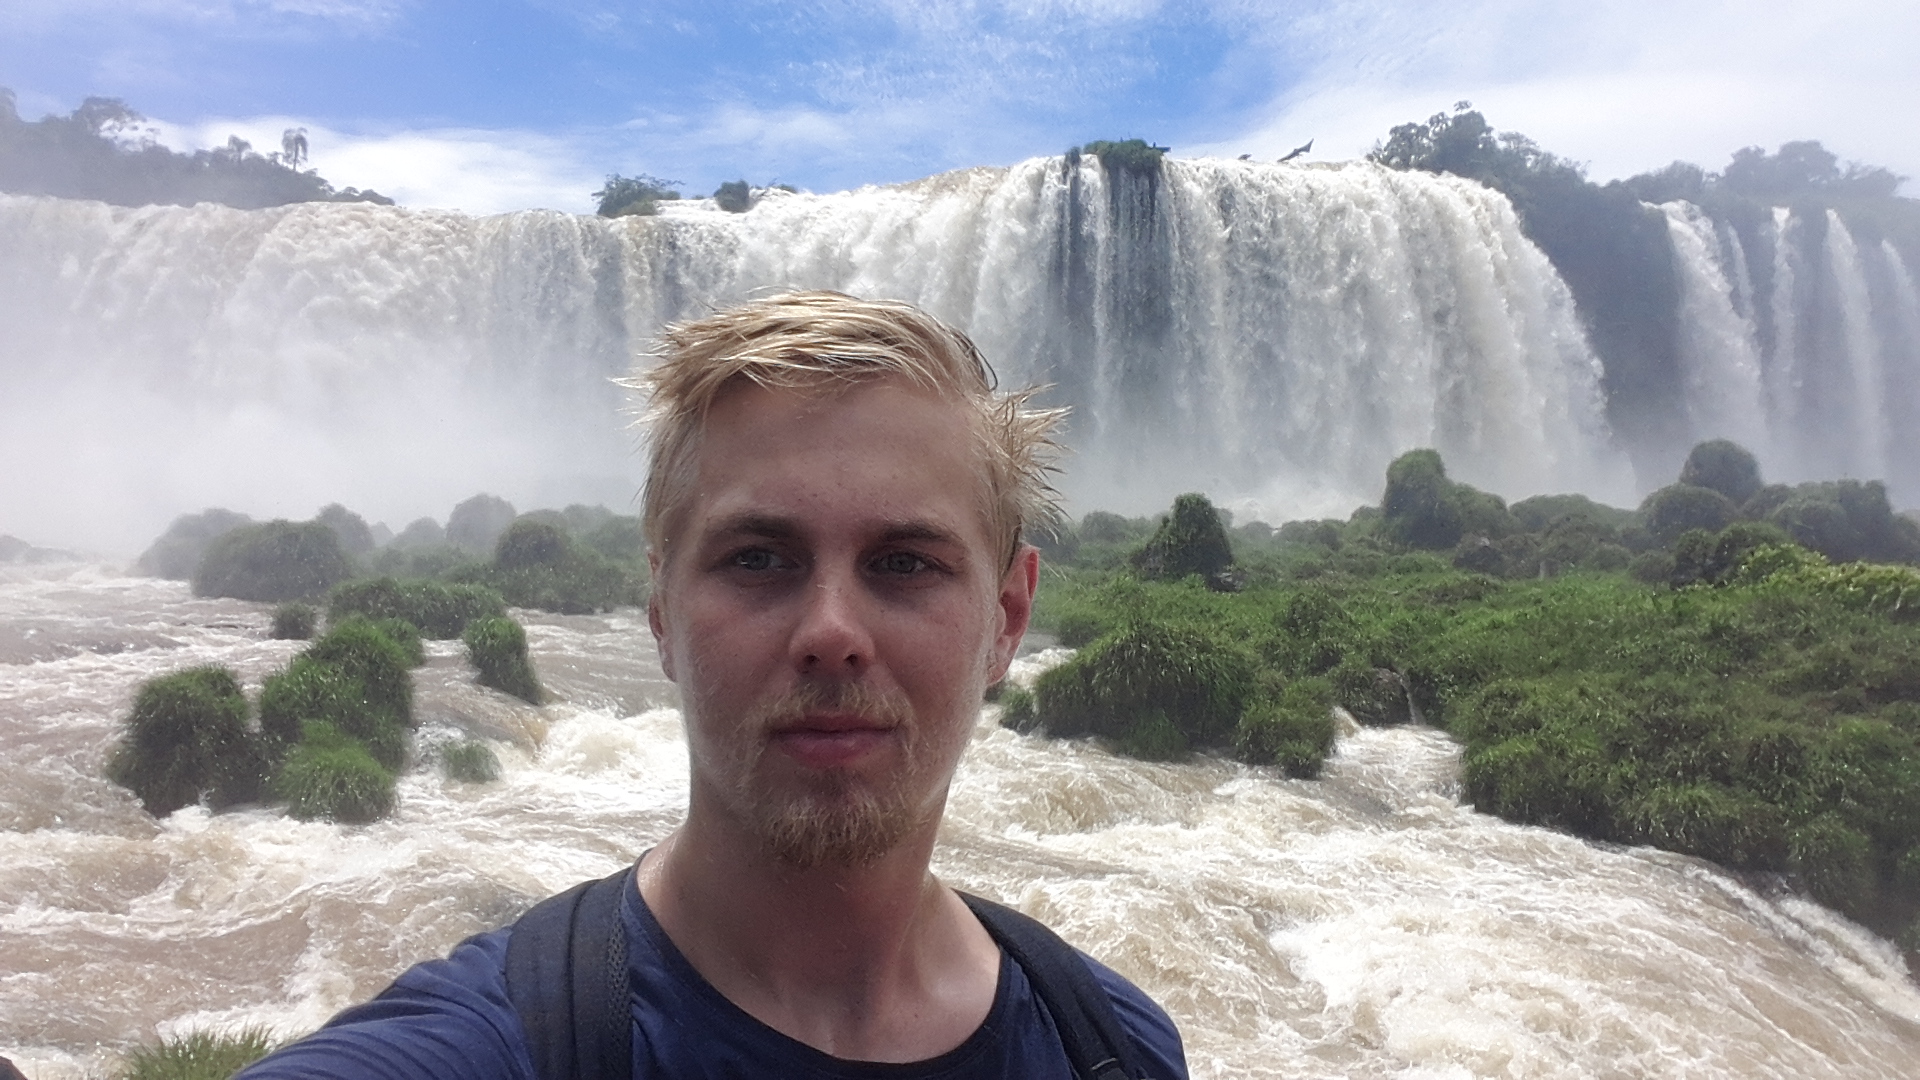 Selfie, Iguazu falls, Brazil. At this stage falling water and wind made conditions very wet.